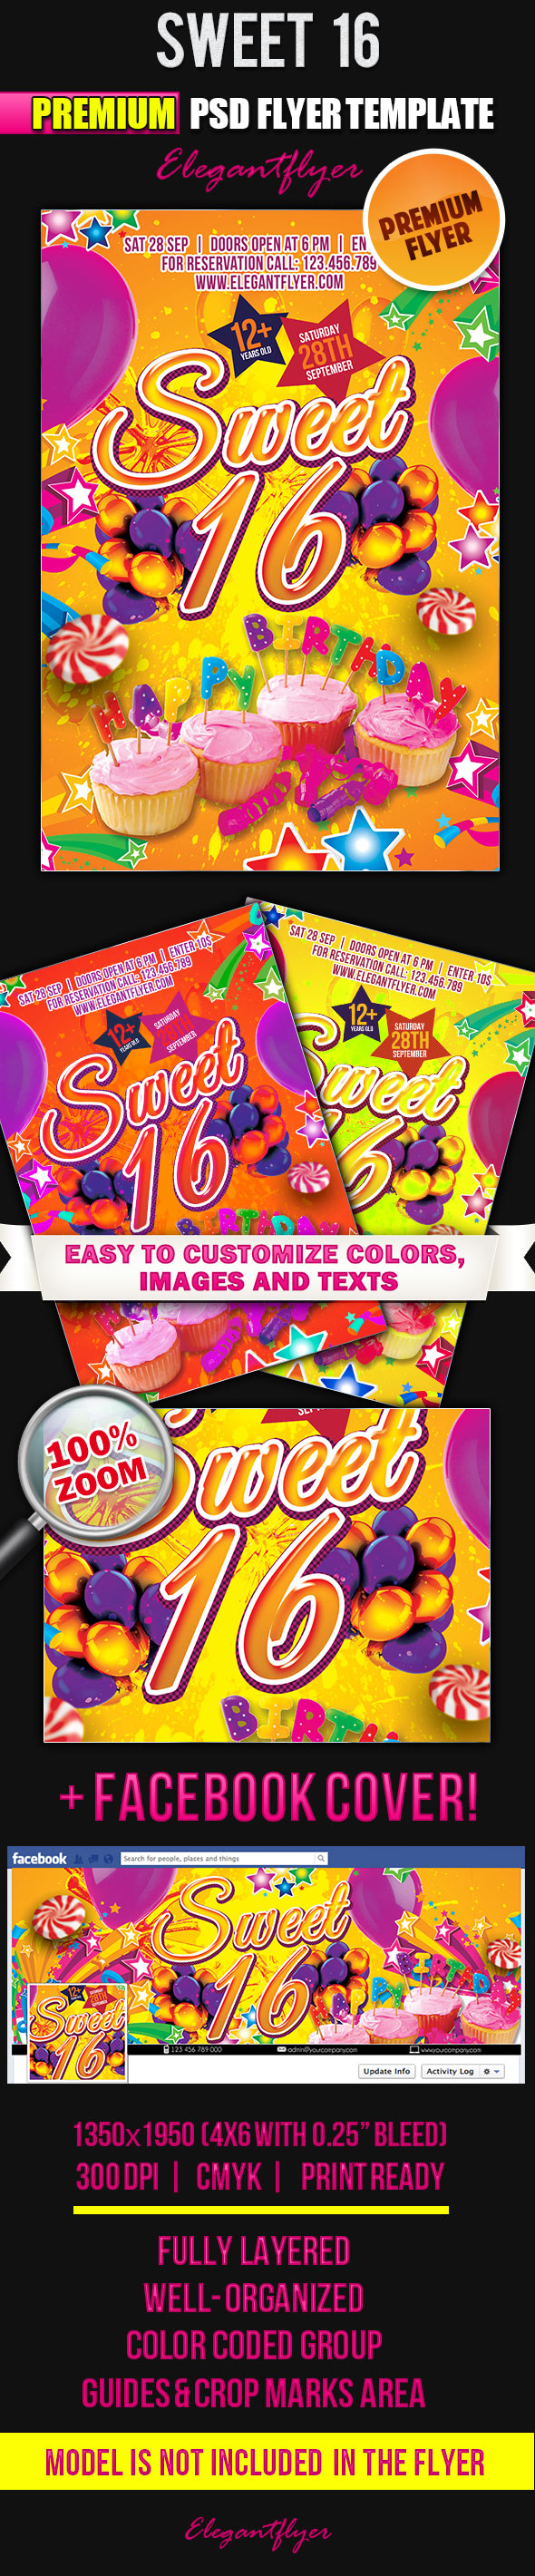 PSD Flyers Free Templates for Sweet 16